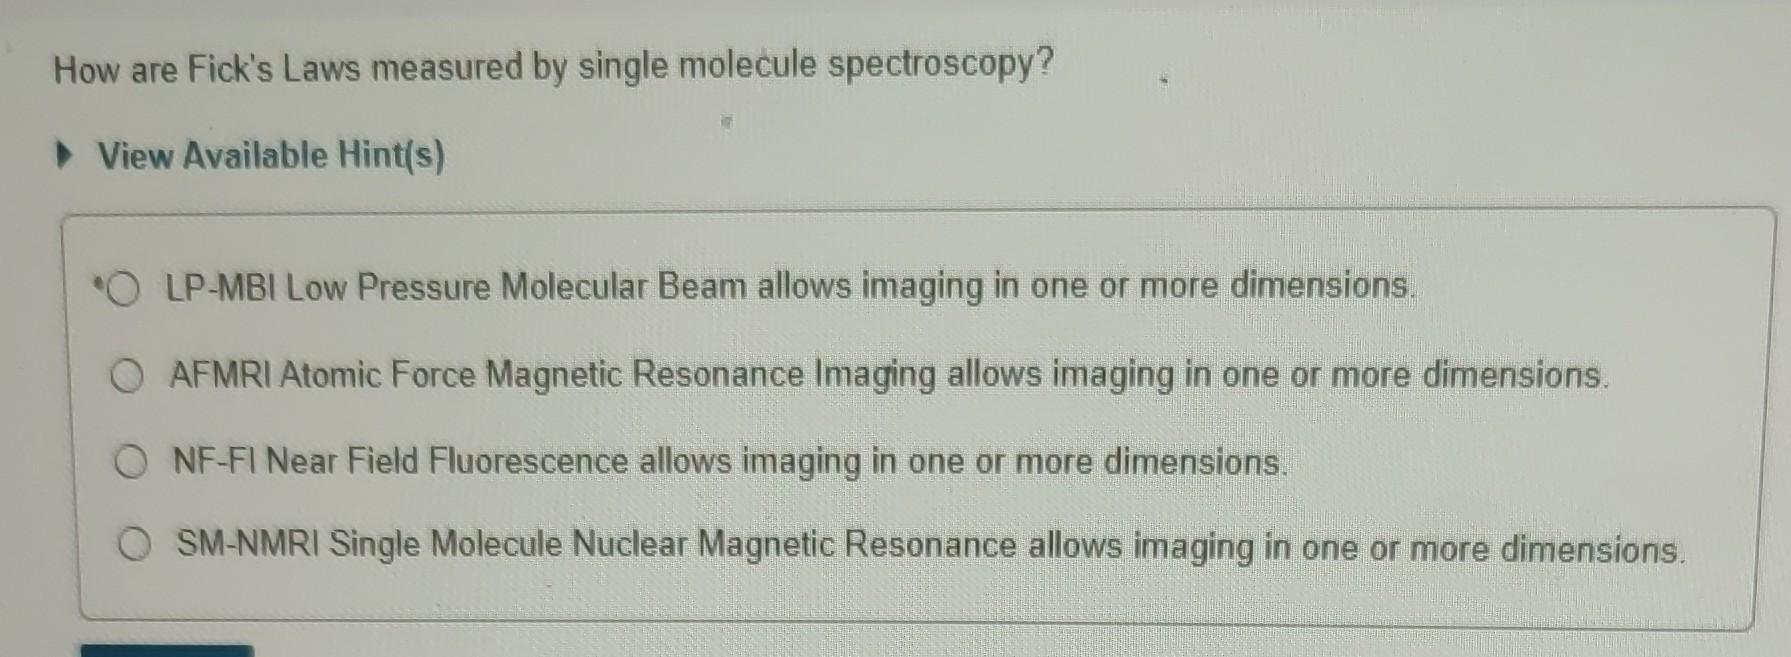 How are Fick's Laws measured by single molecule spectroscopy?  View Available Hint(s) LP-MBI Low Pressure